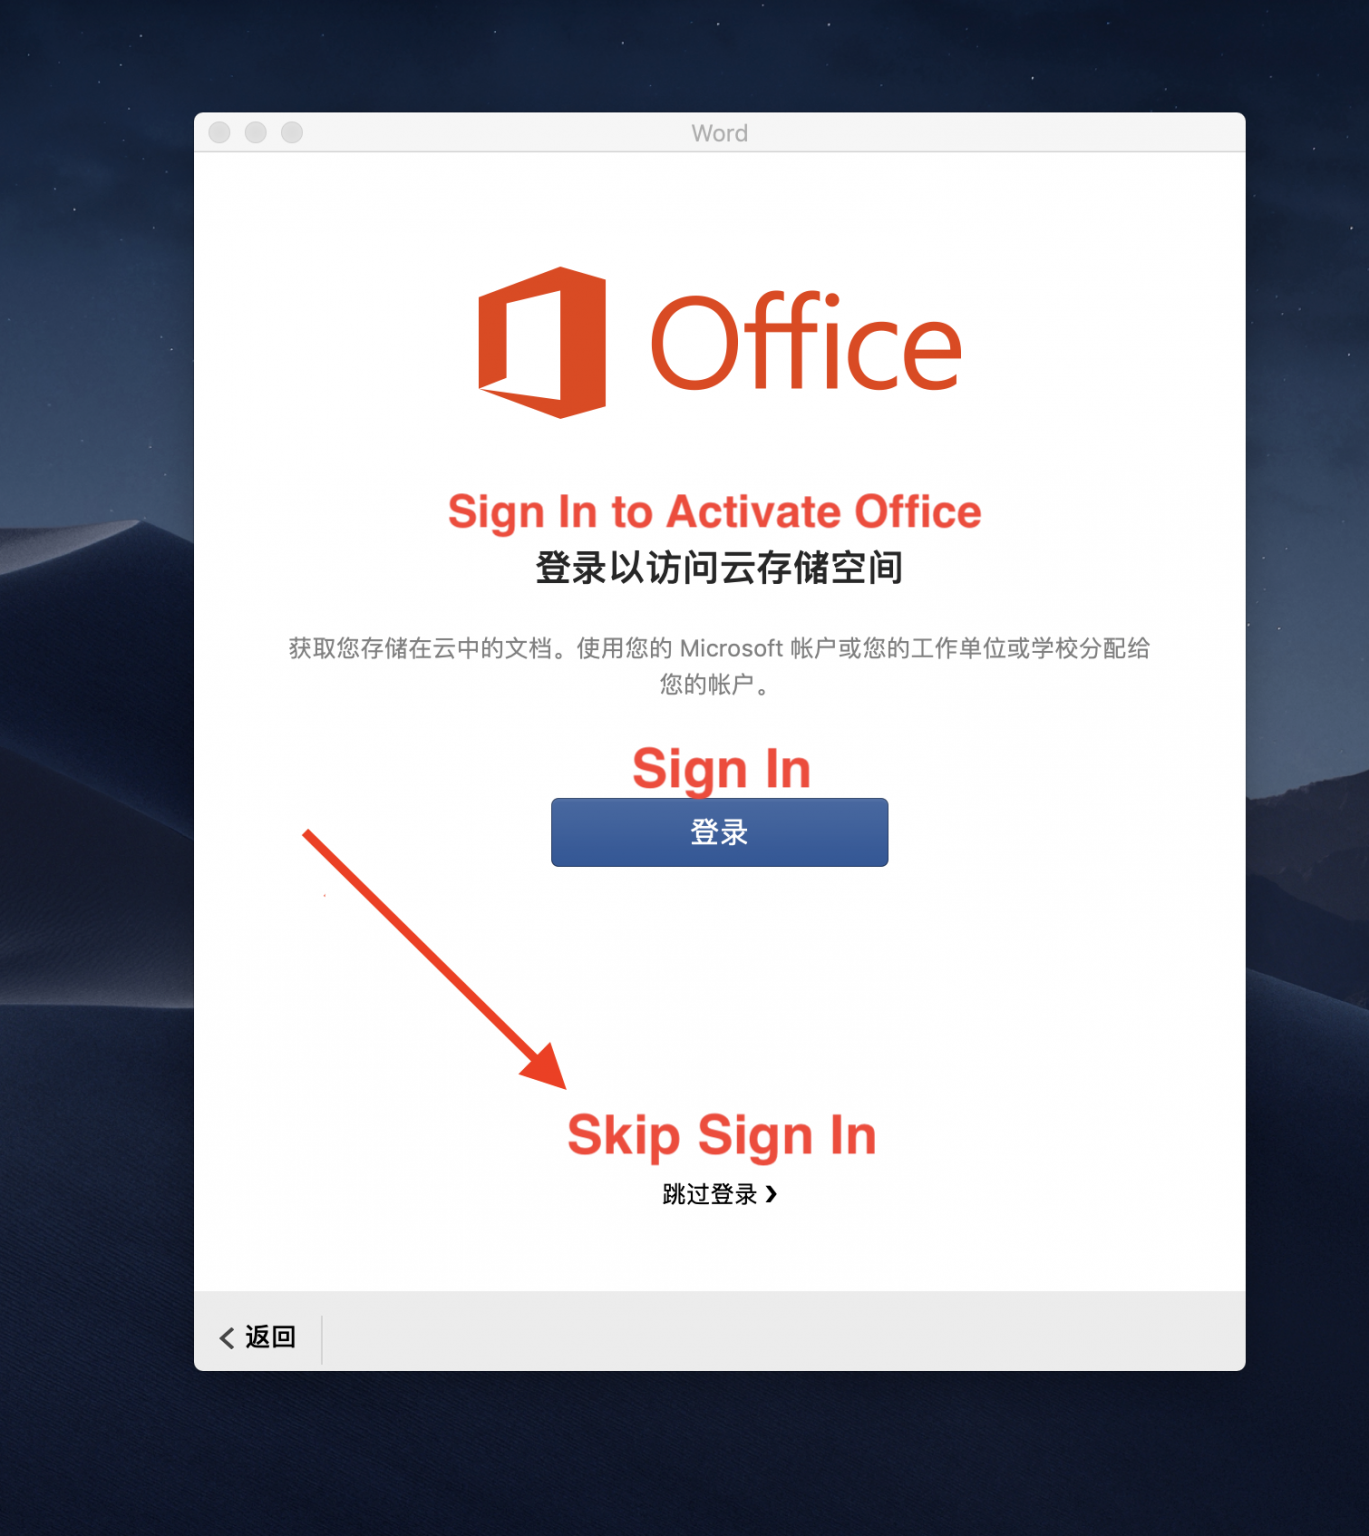 ms office 2019 free download for mac